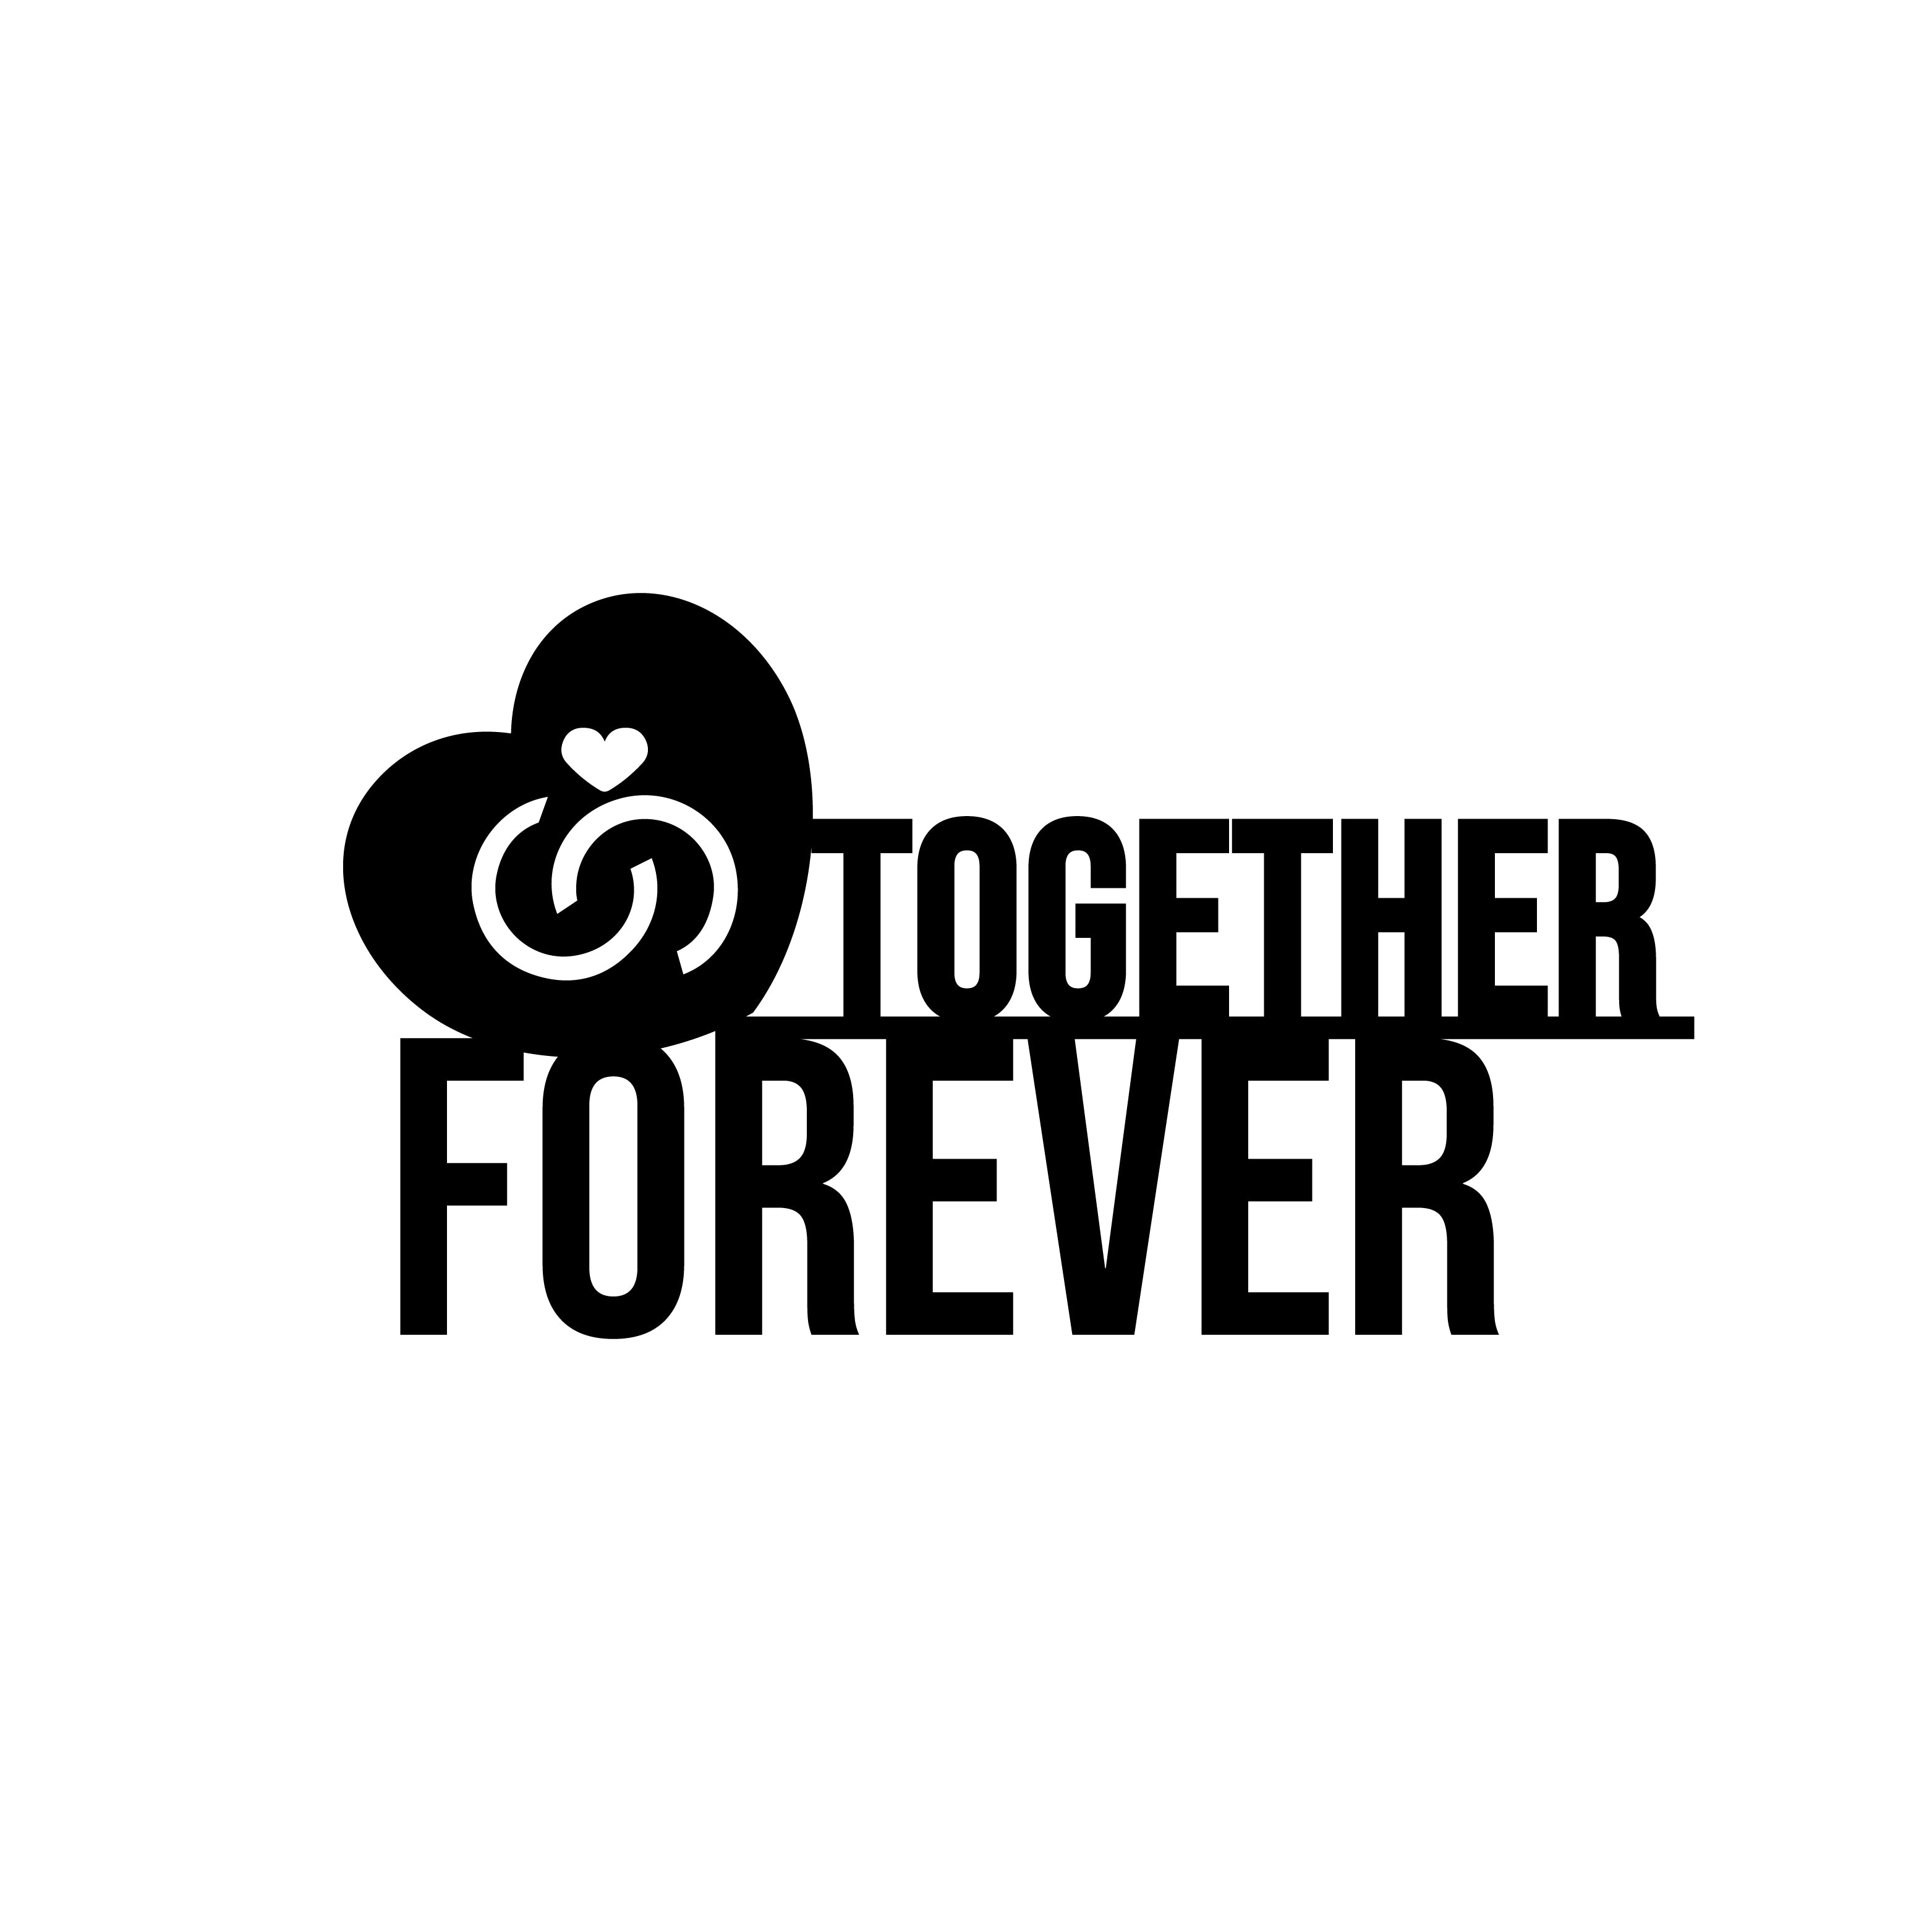 "Together Forever with Love band" Black Engineered Wood Wall Art Cutout, Ready to Hang Home Decor 2